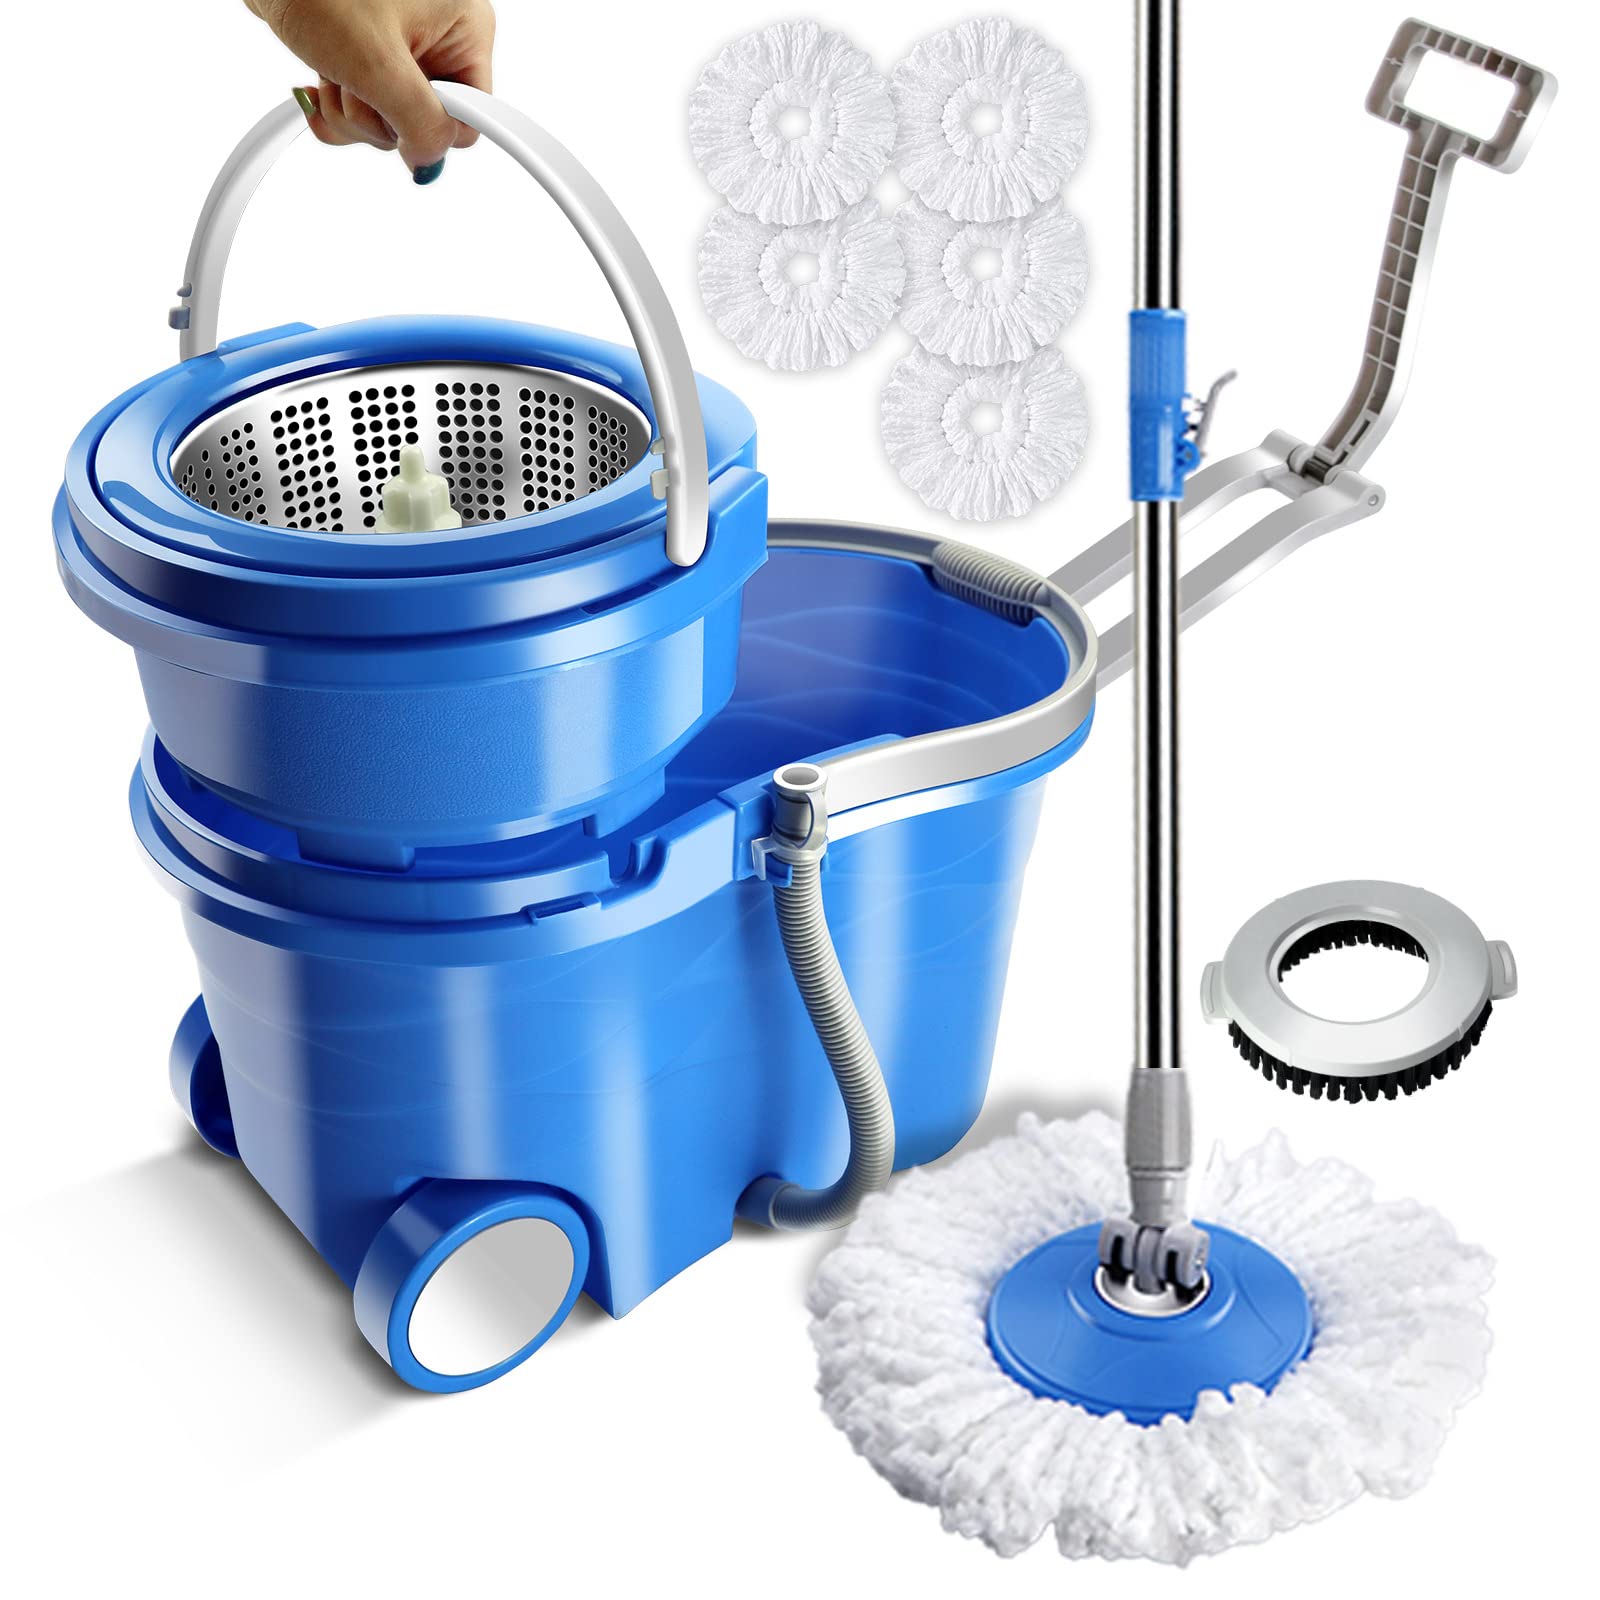 JOYMOOP Mop and Bucket with Wringer Set, Flat Floor Mop and Bucket, Mop for  Floor Cleaning with 5 Microfiber Pads, Wet and Dry Use, Household Cleaning  Tools, for Hardwood, Laminate, Tile 